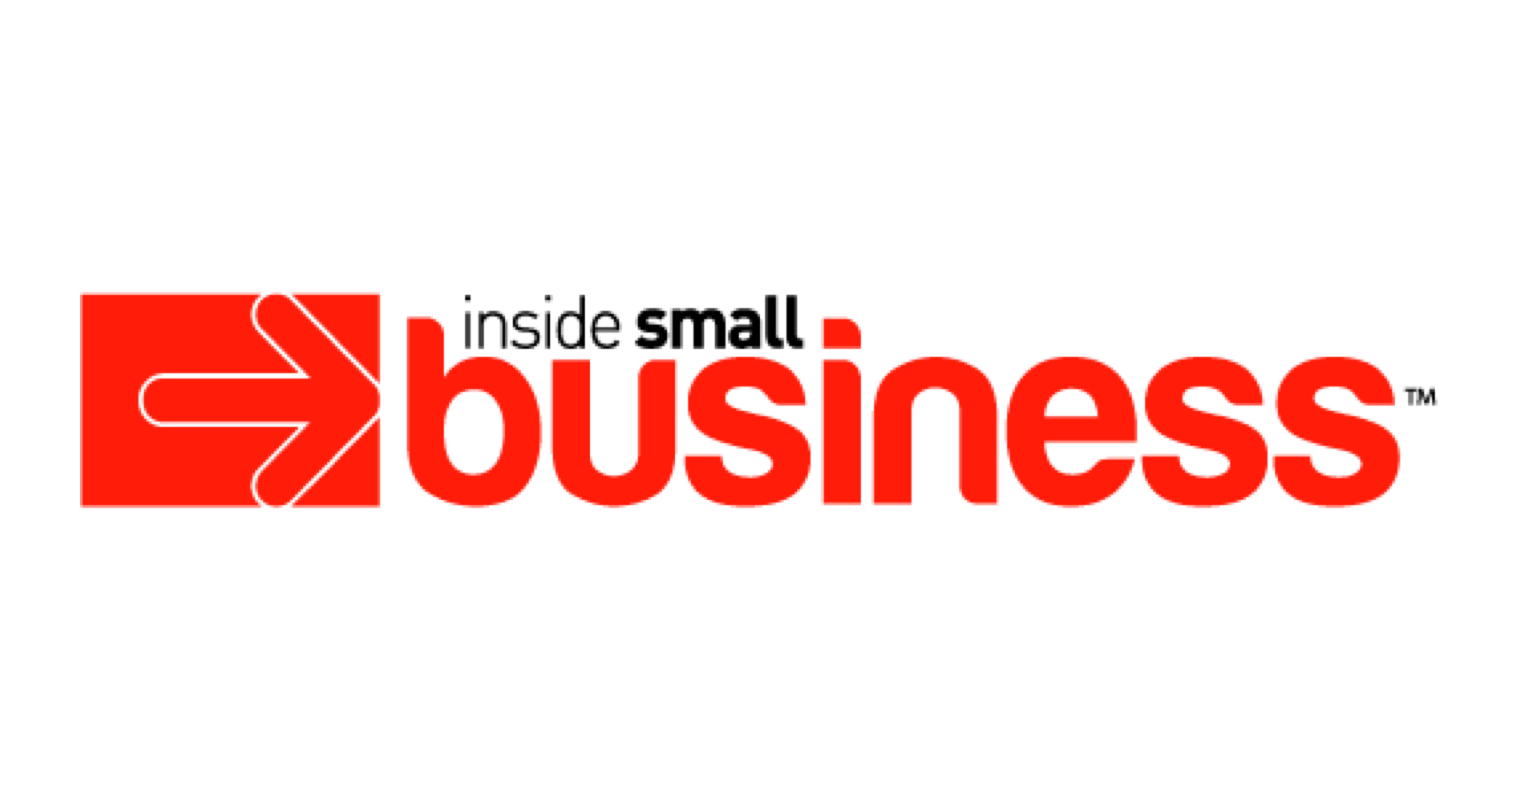 Inside Small Business